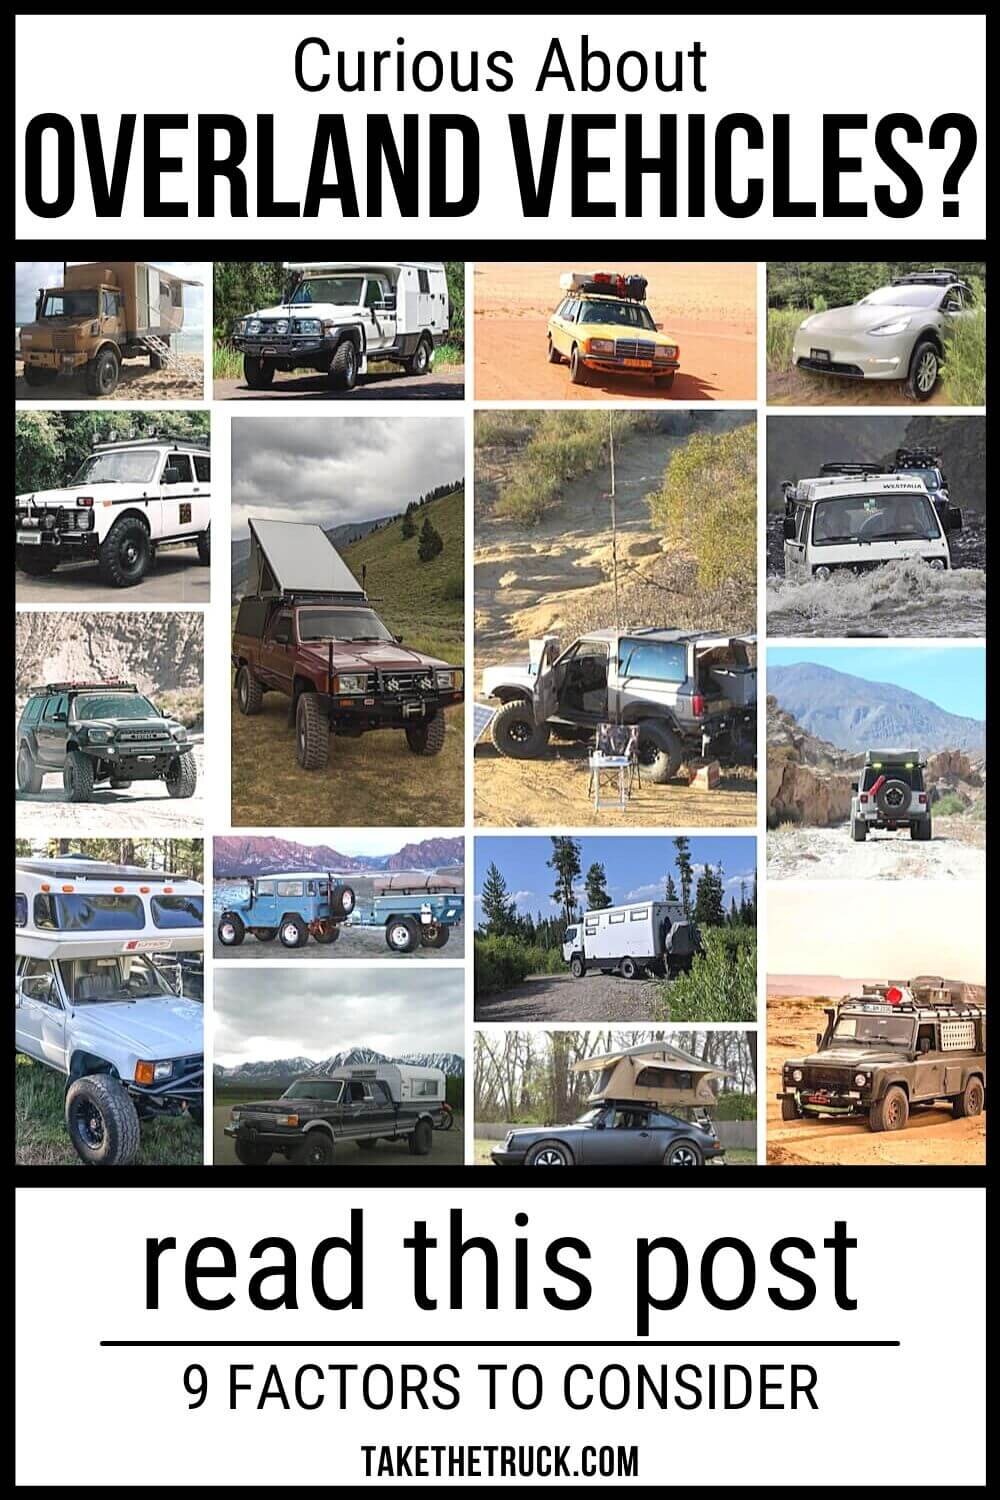 Looking for an overland vehicle? 8 different considerations are outlined, as are pros &amp; cons to different overlanding rigs - this guide can help you find the perfect overland truck or SUV. 